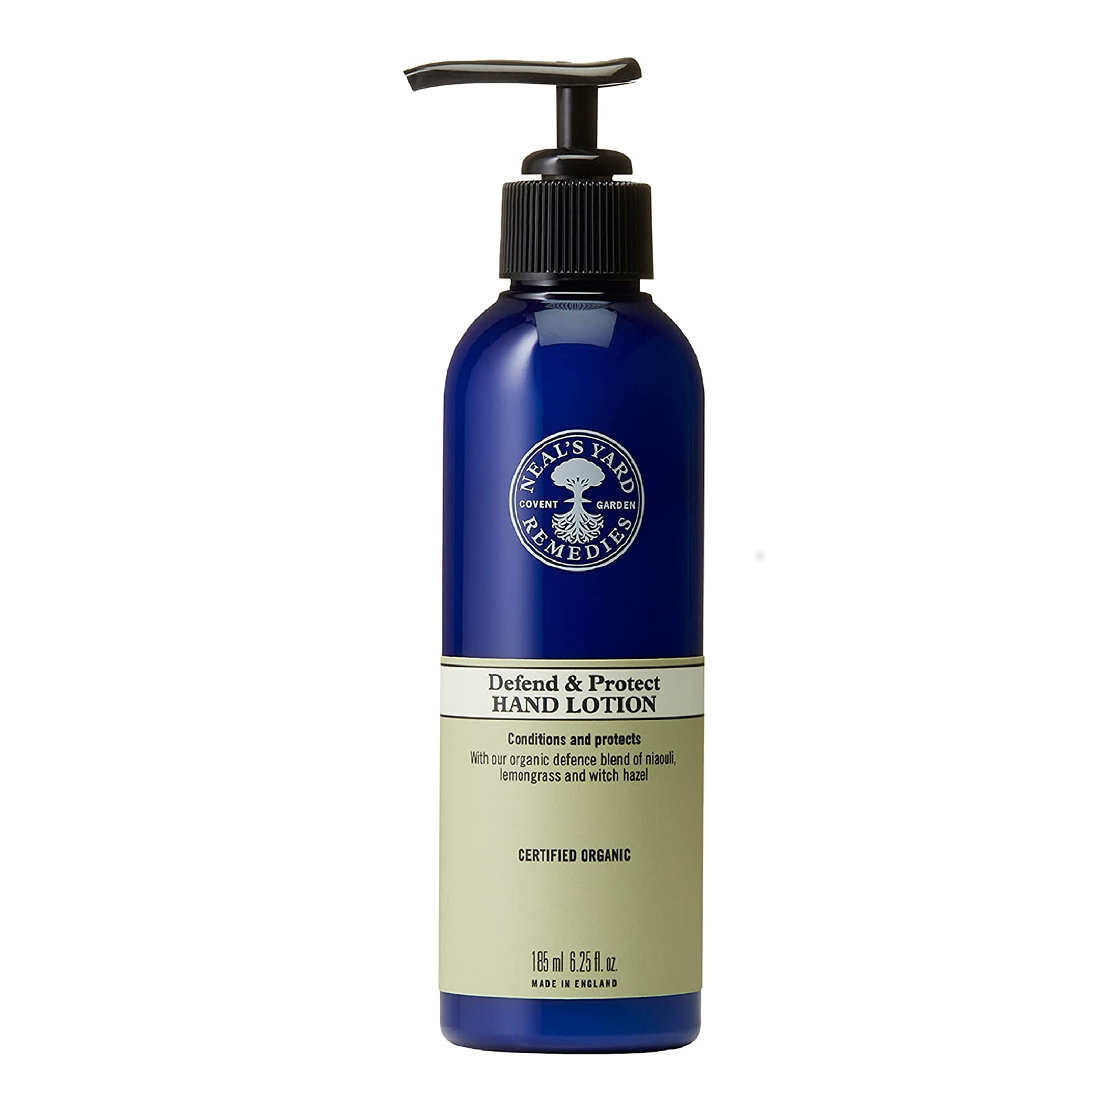 Neal's Yard Remedies Defend and Protect Hand Lotion 185ml